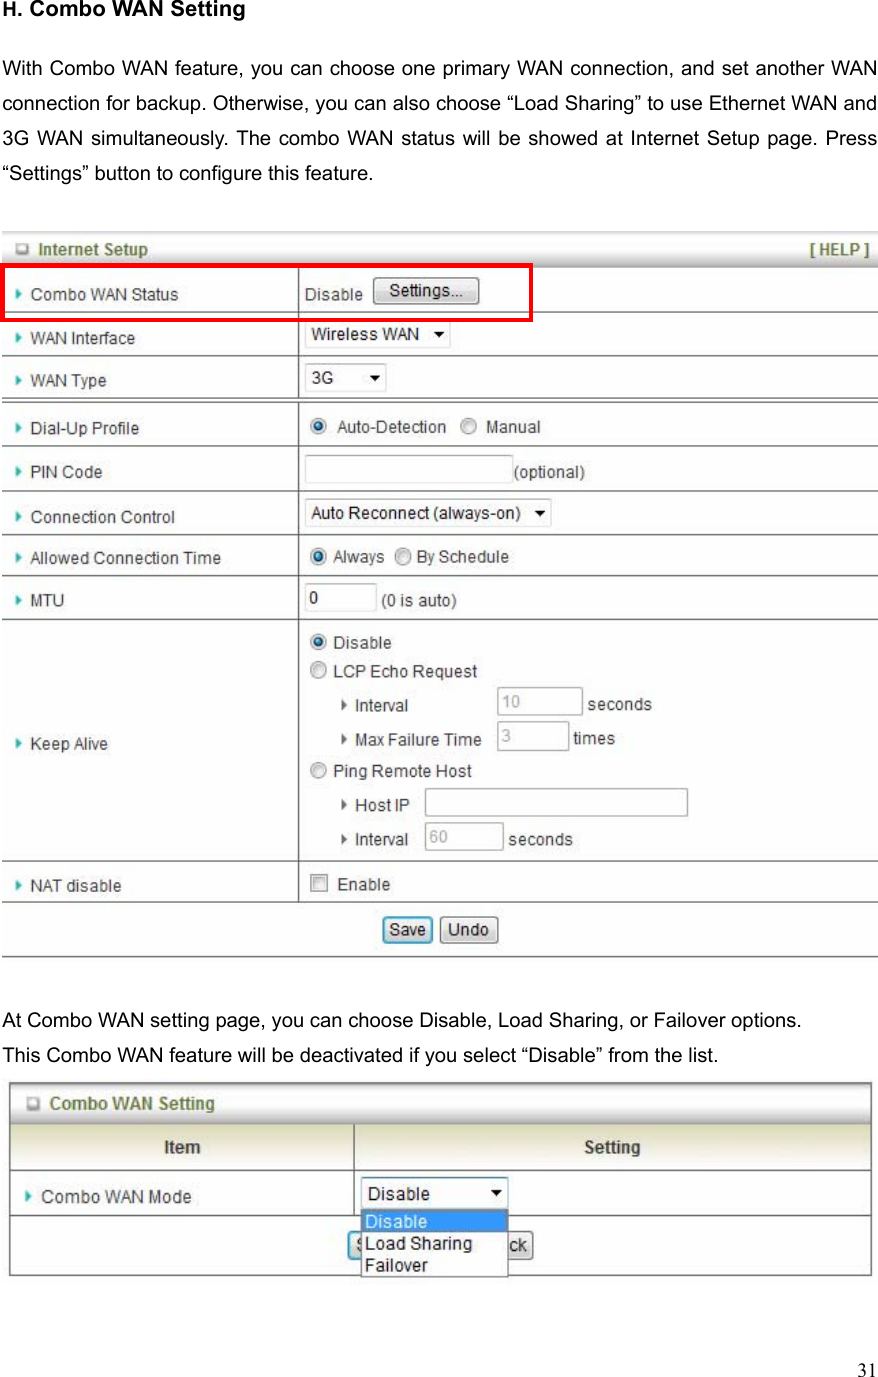  31H. Combo WAN Setting  With Combo WAN feature, you can choose one primary WAN connection, and set another WAN connection for backup. Otherwise, you can also choose “Load Sharing” to use Ethernet WAN and 3G WAN simultaneously. The combo WAN status will be showed at Internet Setup page. Press “Settings” button to configure this feature.    At Combo WAN setting page, you can choose Disable, Load Sharing, or Failover options. This Combo WAN feature will be deactivated if you select “Disable” from the list.   